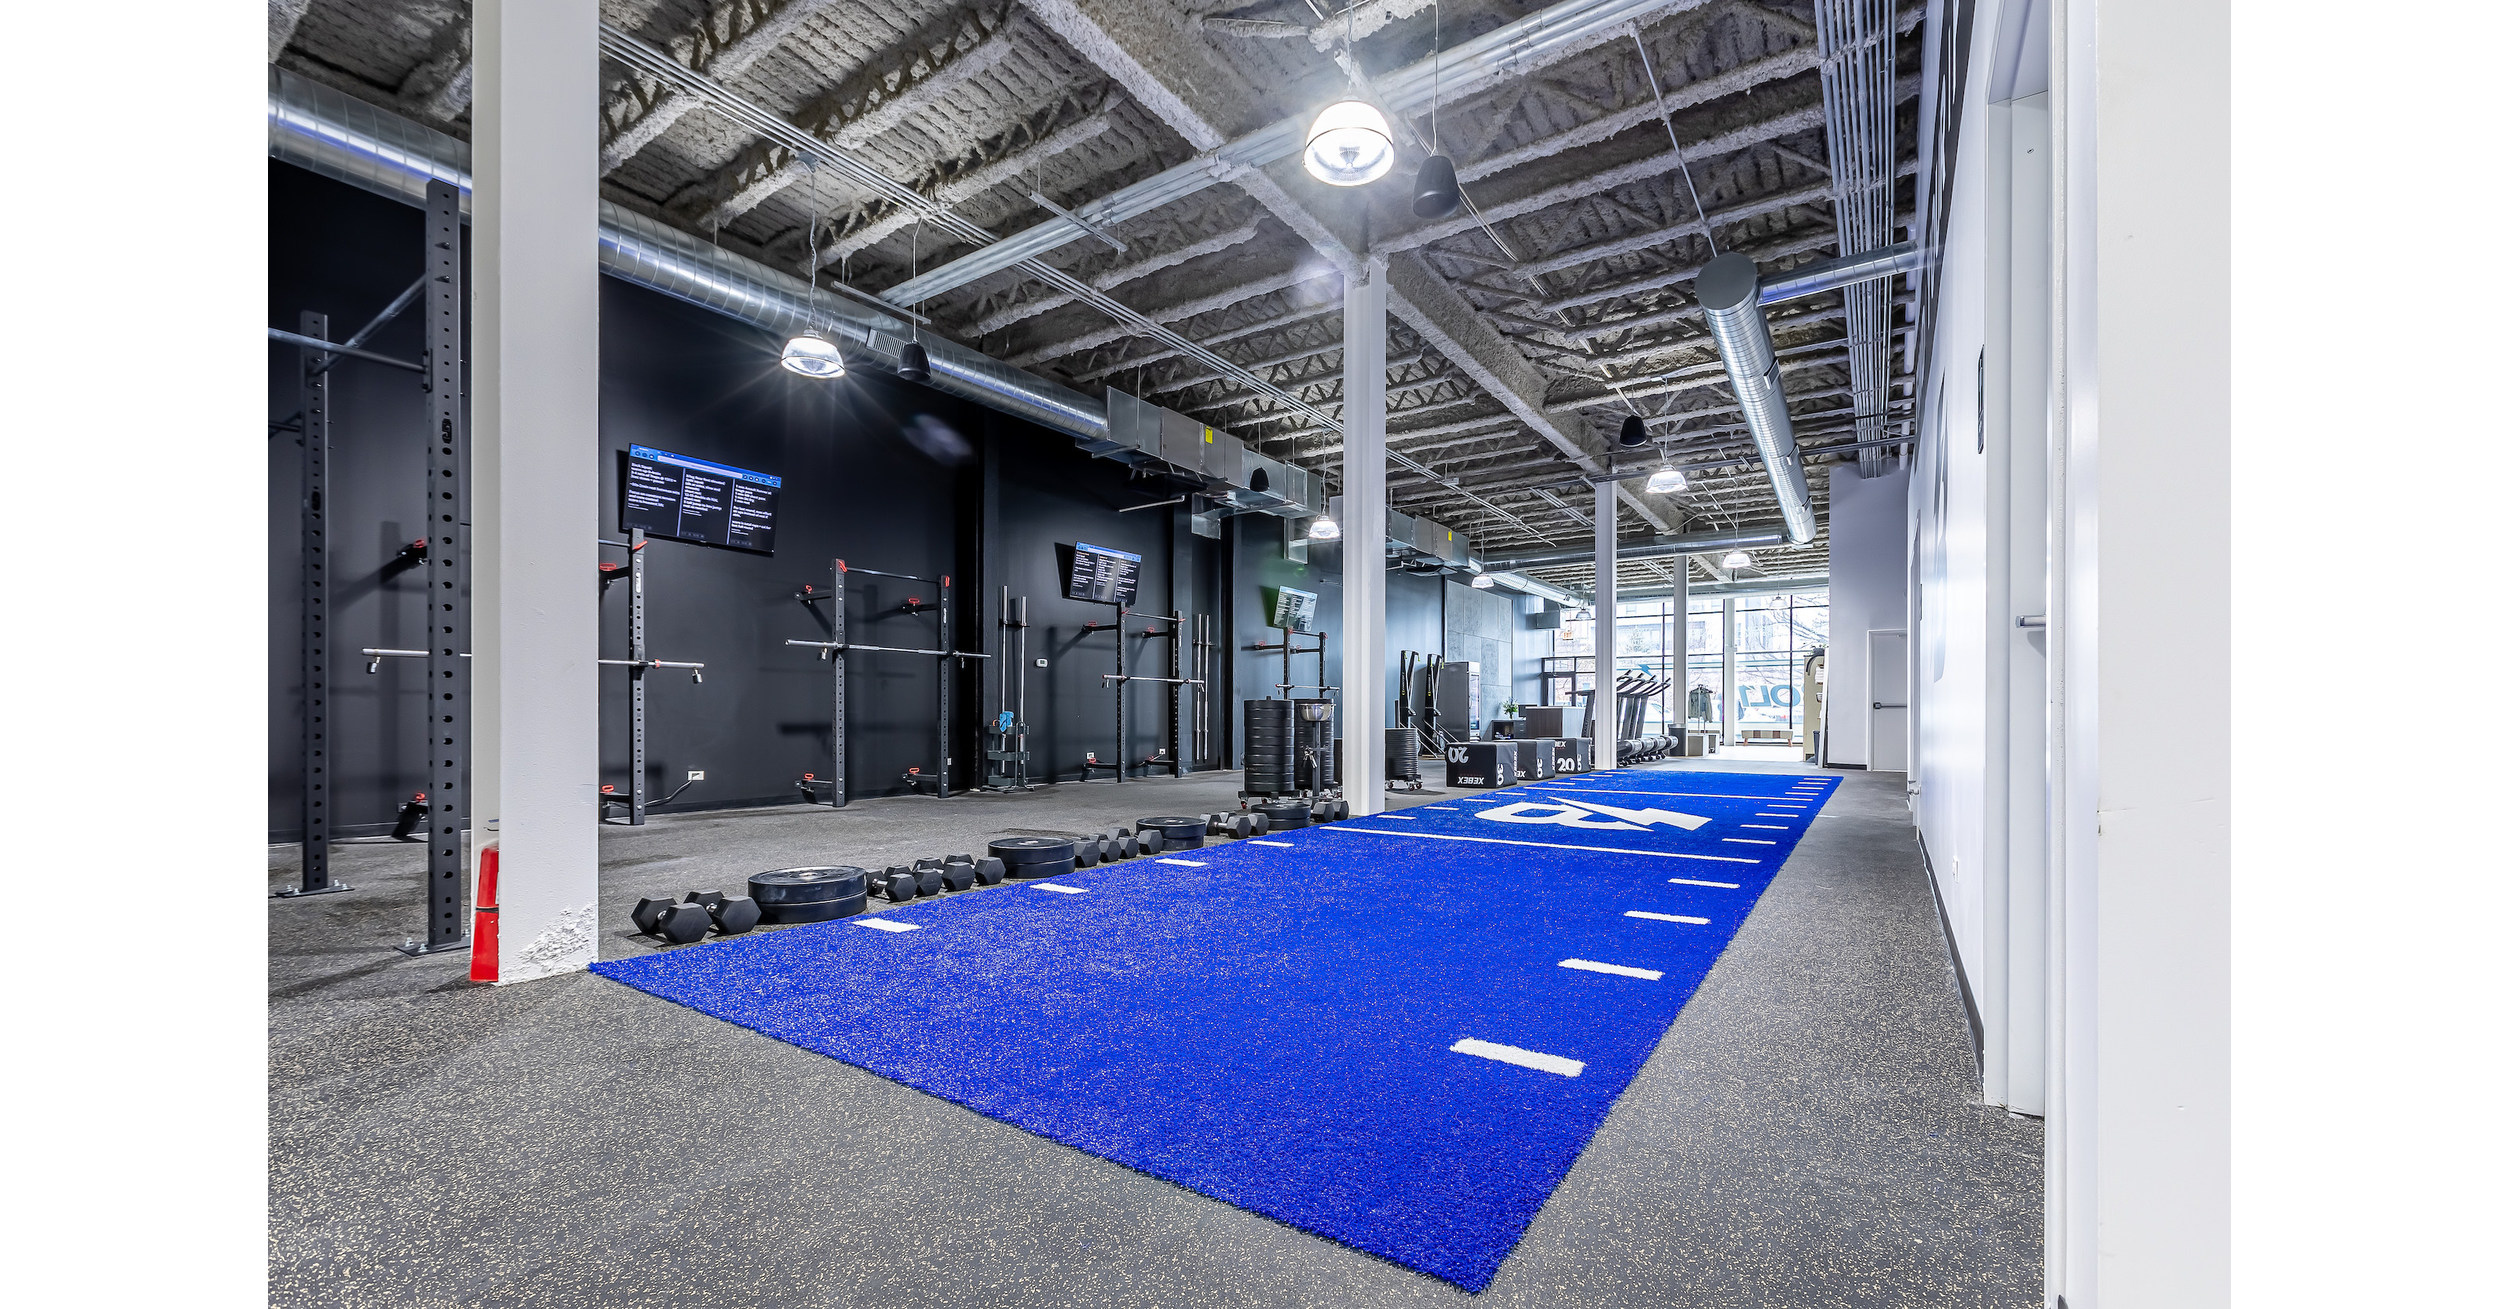 Bolt Fitness Chicago Announces Its Grand Opening in Chicago’s Ravenswood Neighborhood